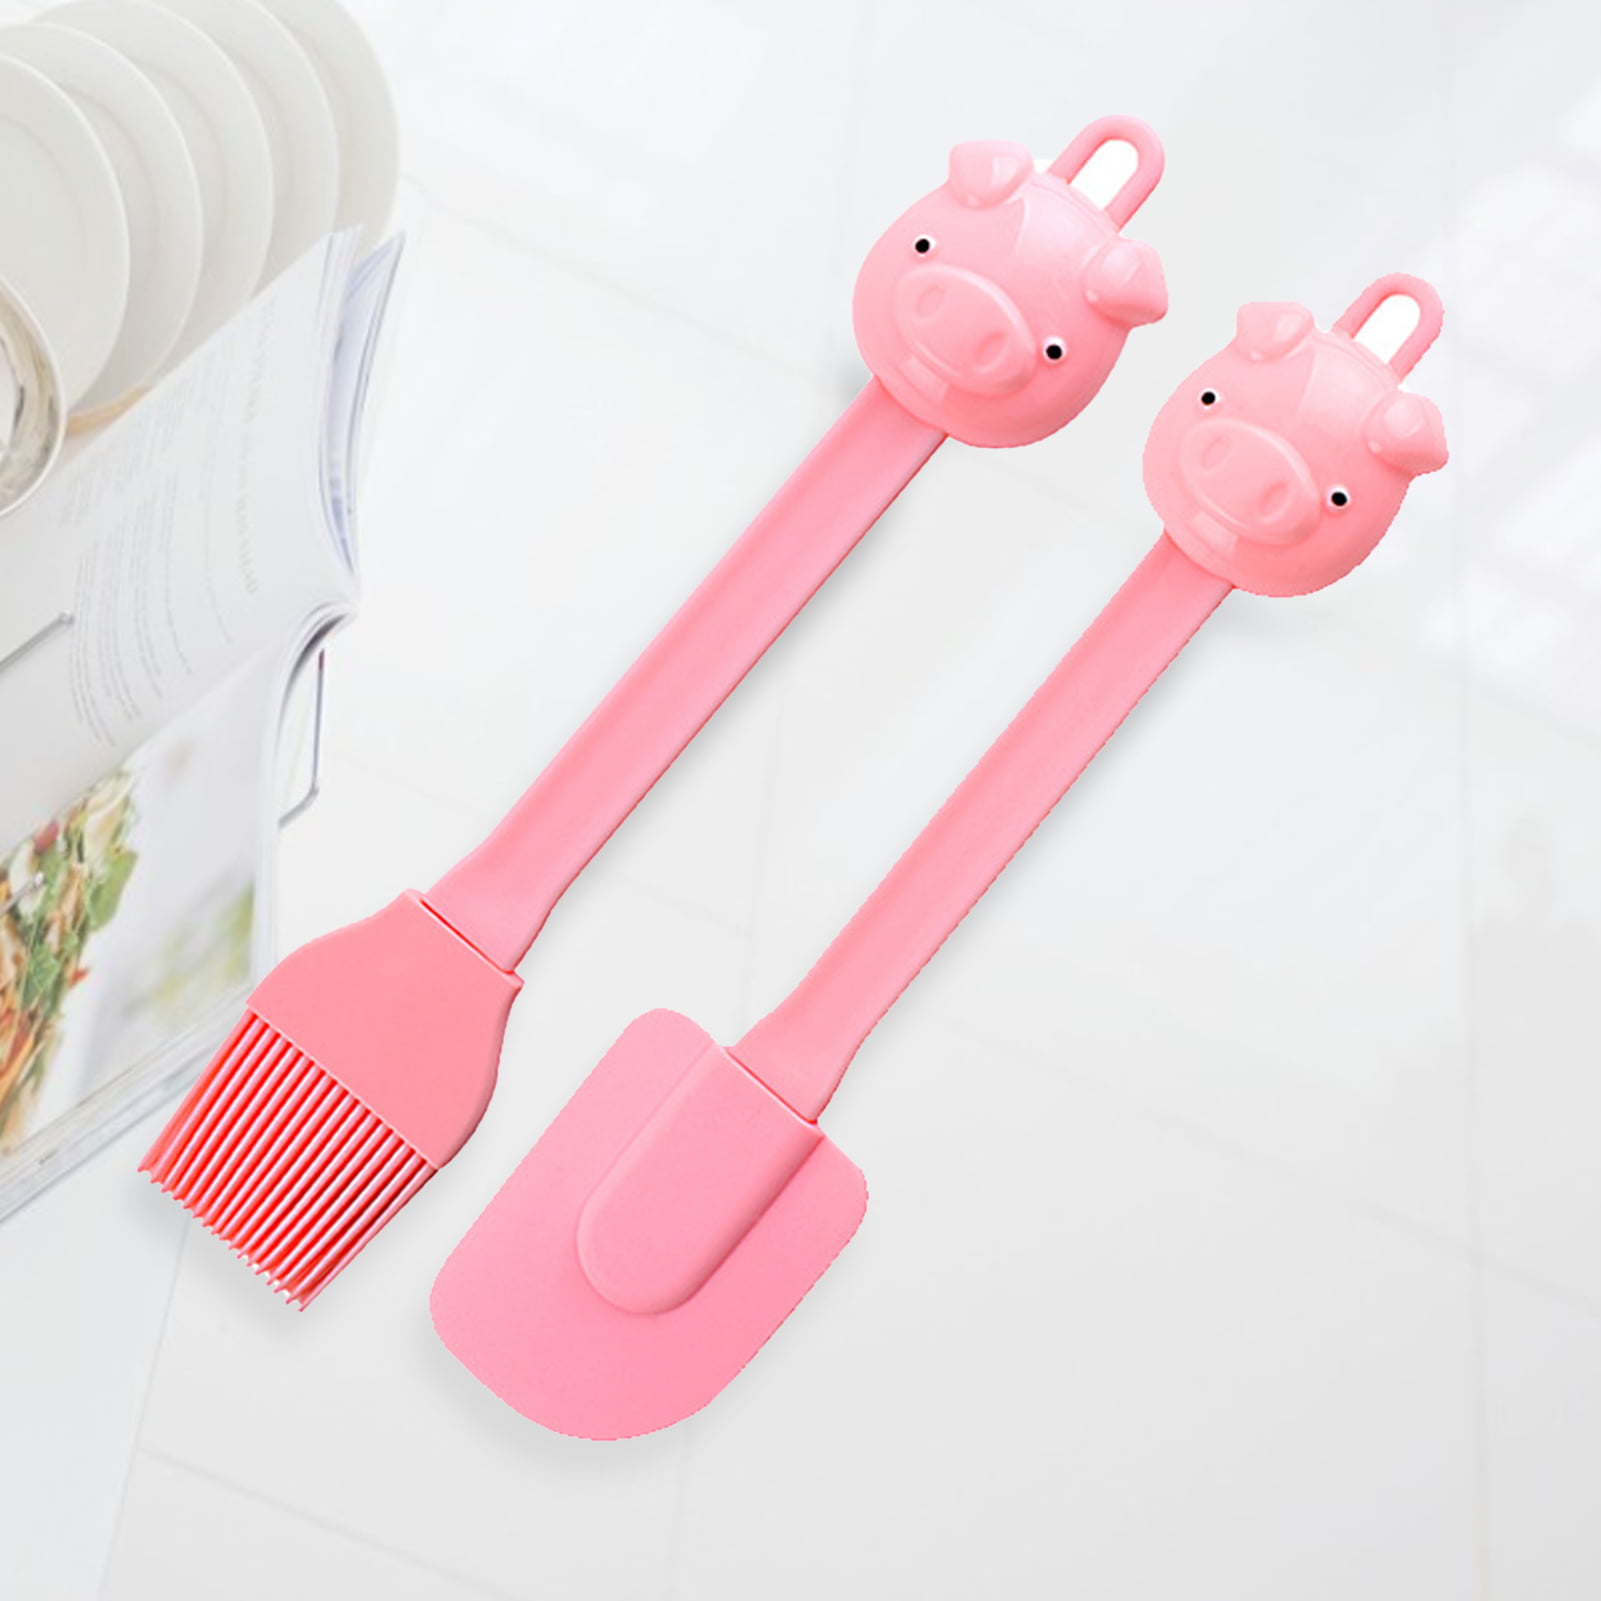 Dream Lifestyle 2Pcs/Set Extra Large Silicone Spatula: 600F Heat Resistant Flexible Silicon Mixing Stirring Cooking Scraping Baking Bowl Scraper